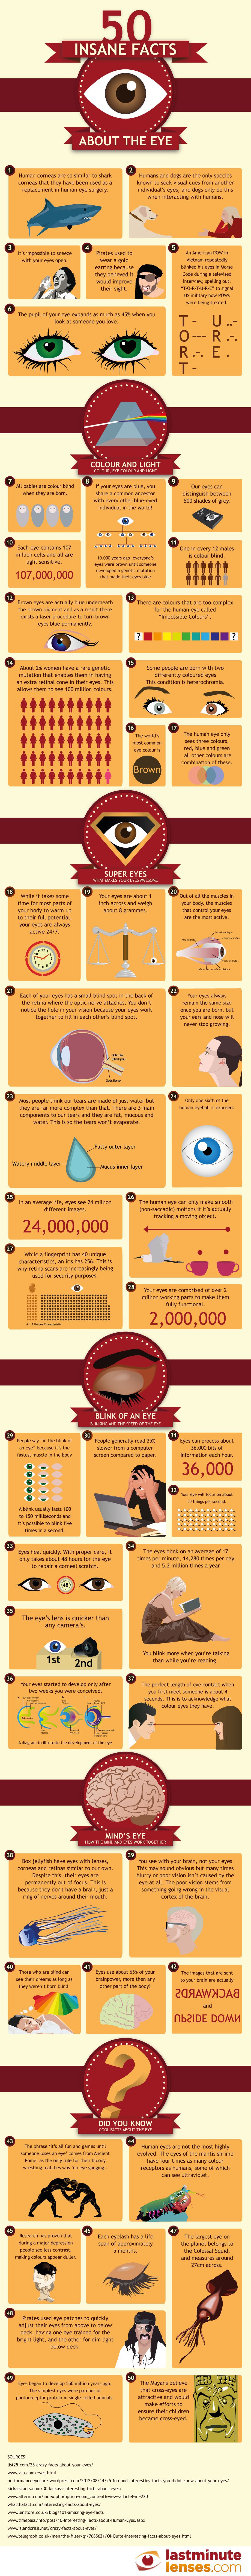 50-insane-facts-about-the-eye_5304c1ab5e664